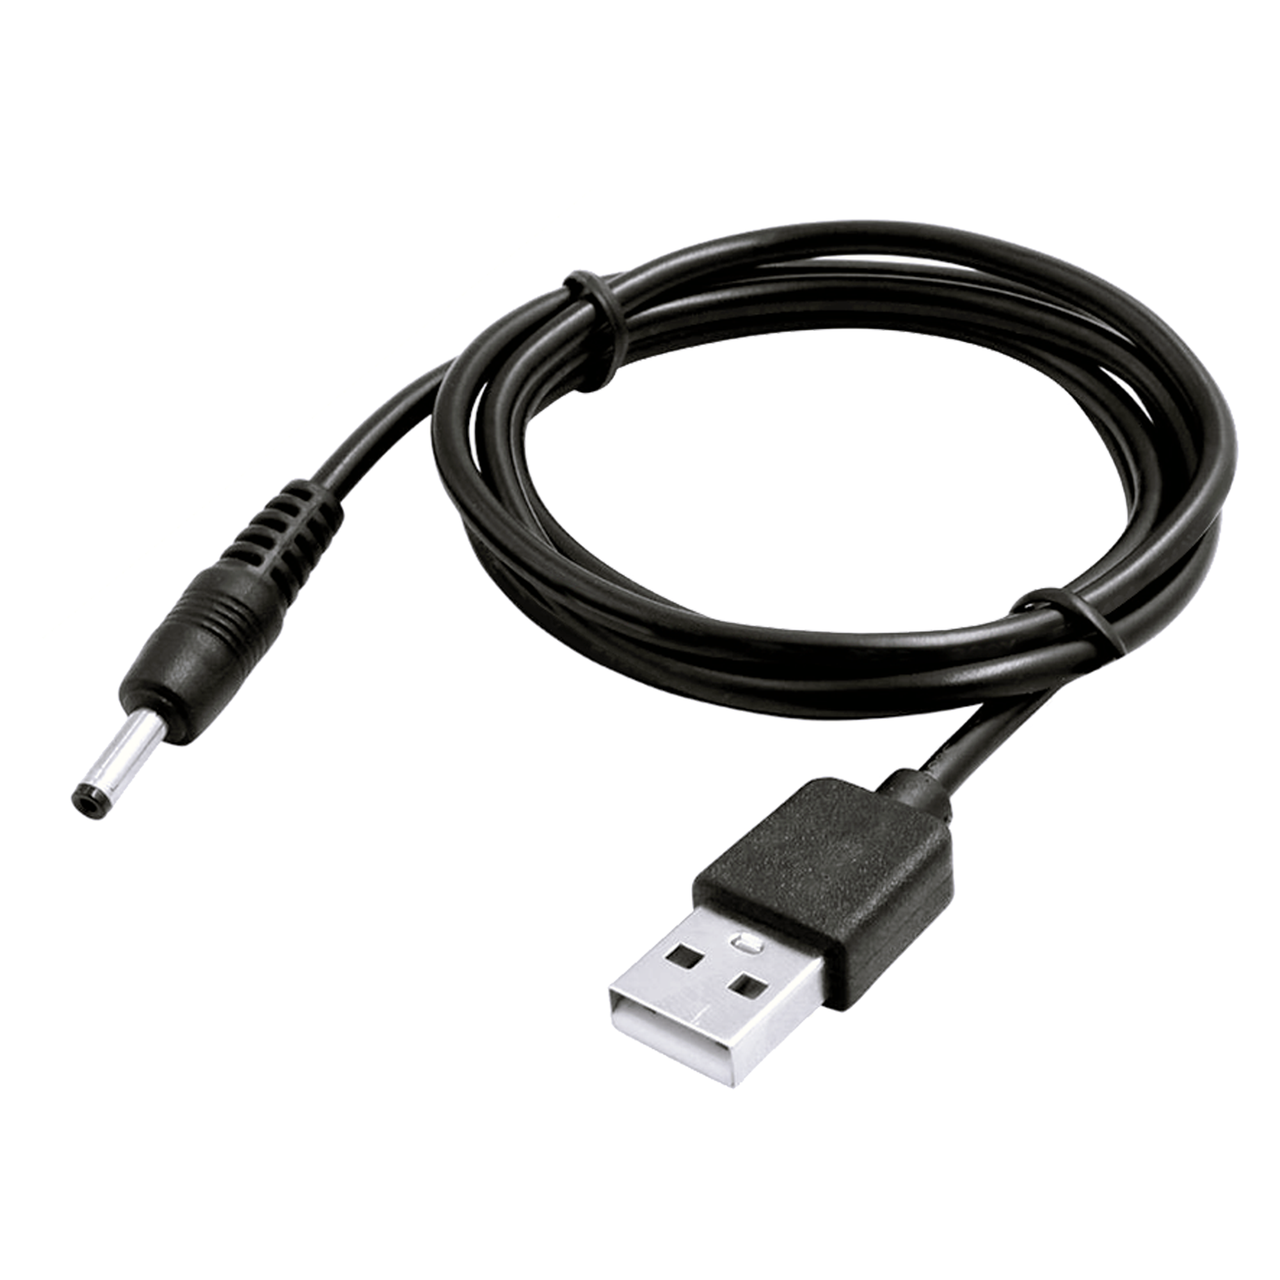 Replacement USB to Radio Power Cable for CC WiFi 3 Internet Radio